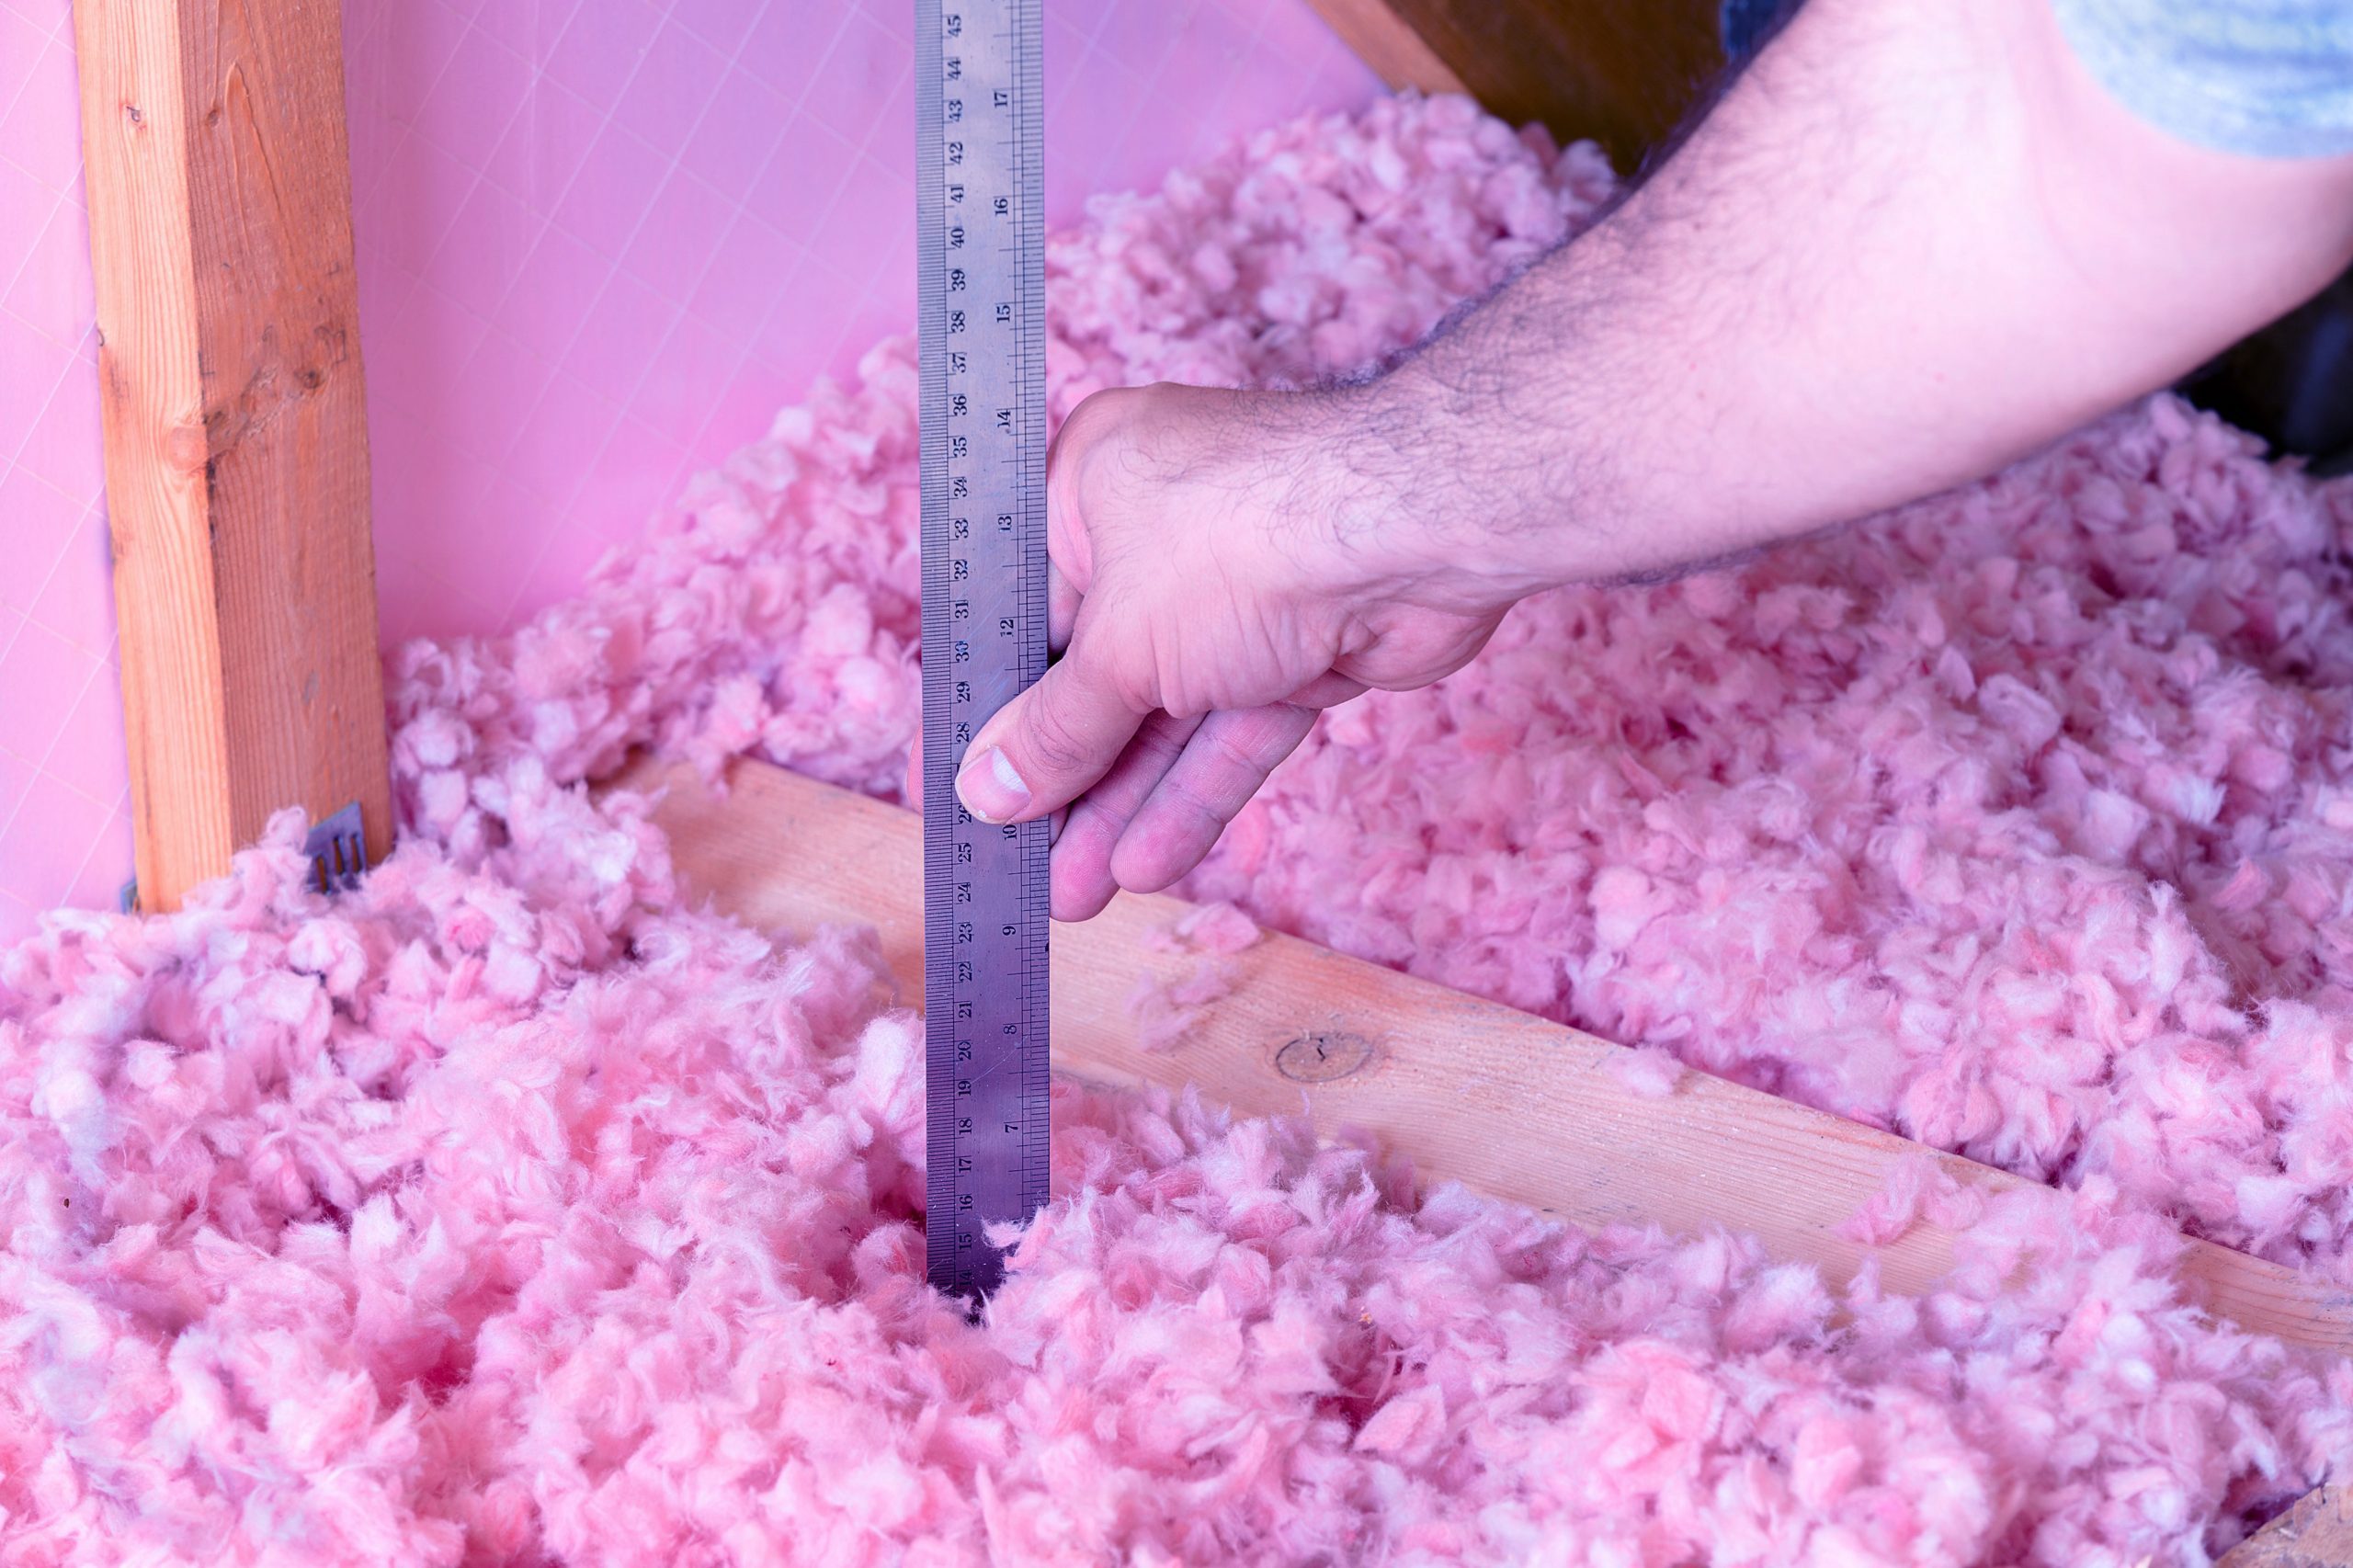 A contractor's arm holding up a ruler while conducting a blown-in fiberglass insulation project